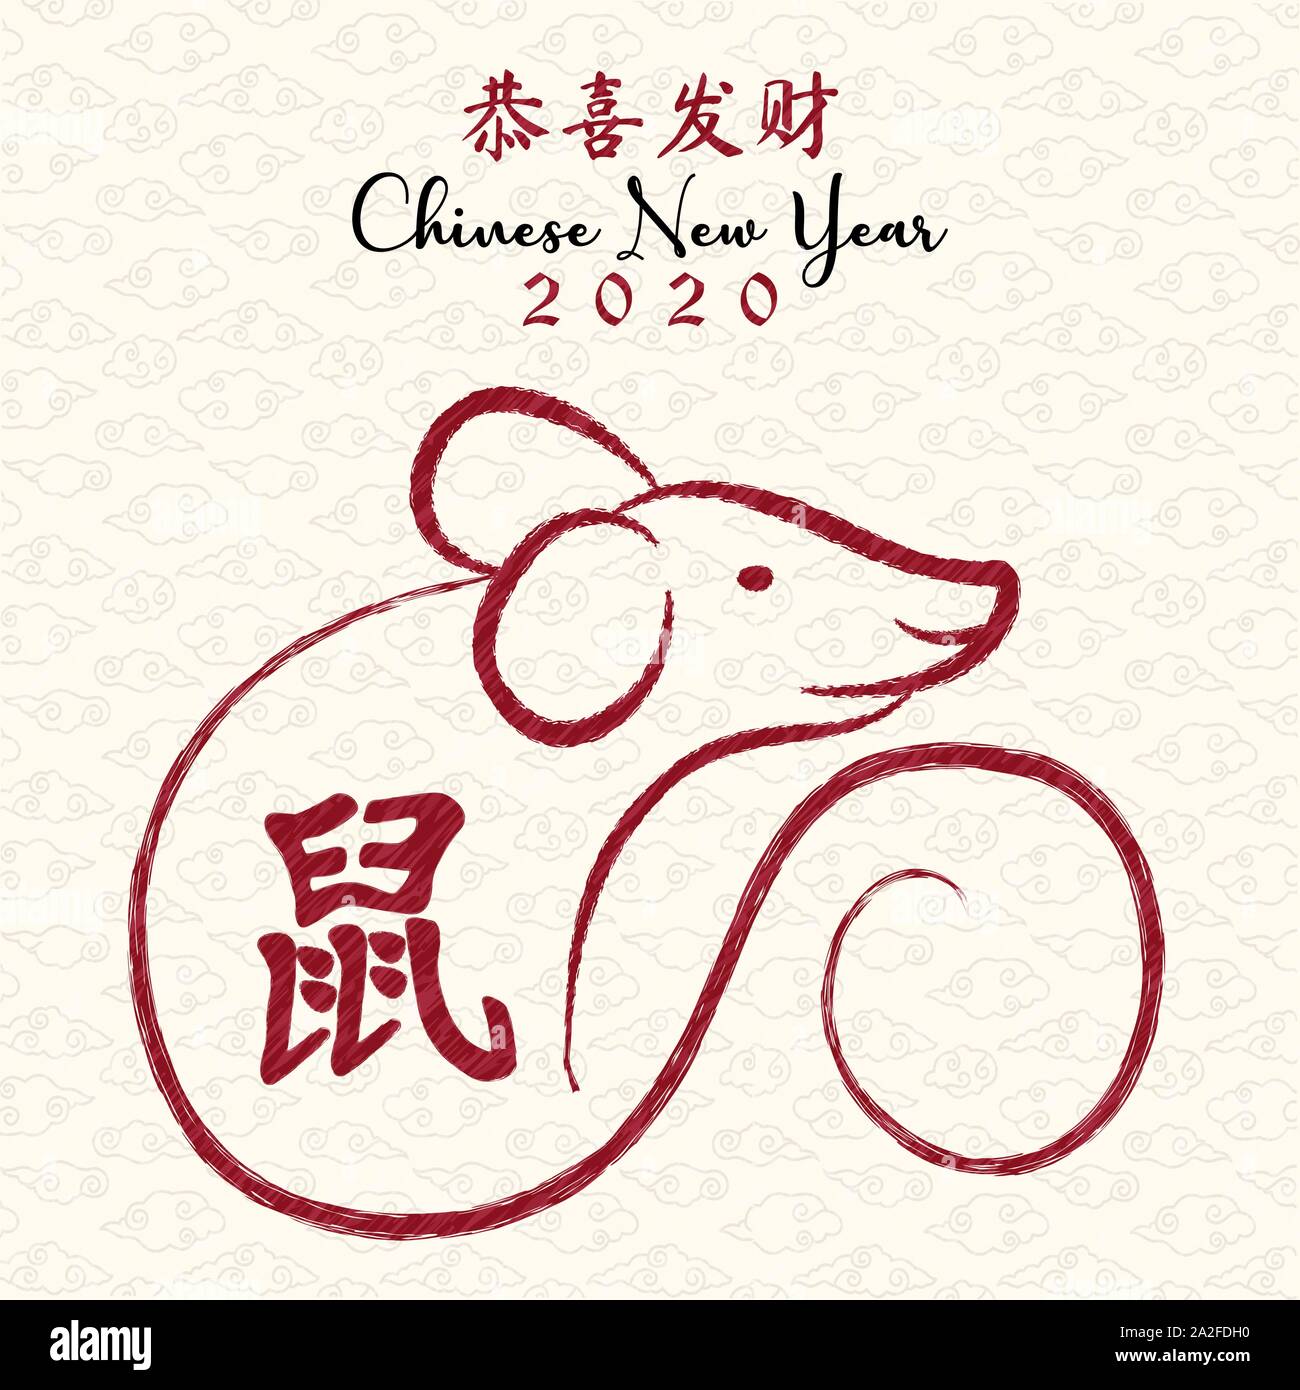 Happy Chinese New year 2020 traditional greeting card of red mouse in hand drawn asian art style. Calligraphy translation: rat, prosperity wishes. Stock Vector